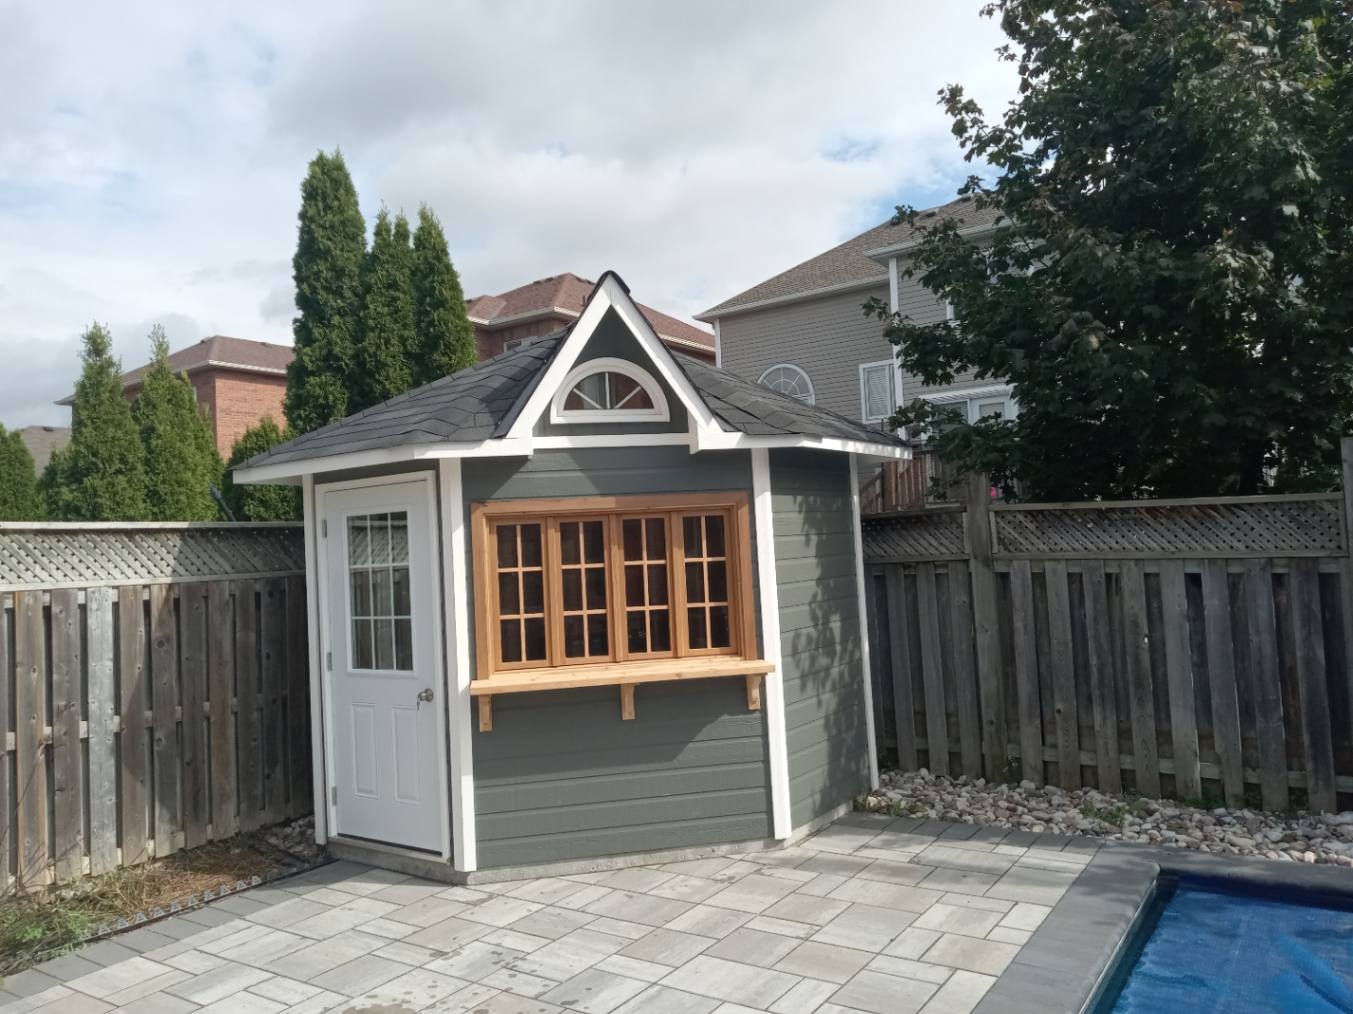 Front view of 8' Catalina Garden Shed located in Whitby, Ontario – Summerwood Products